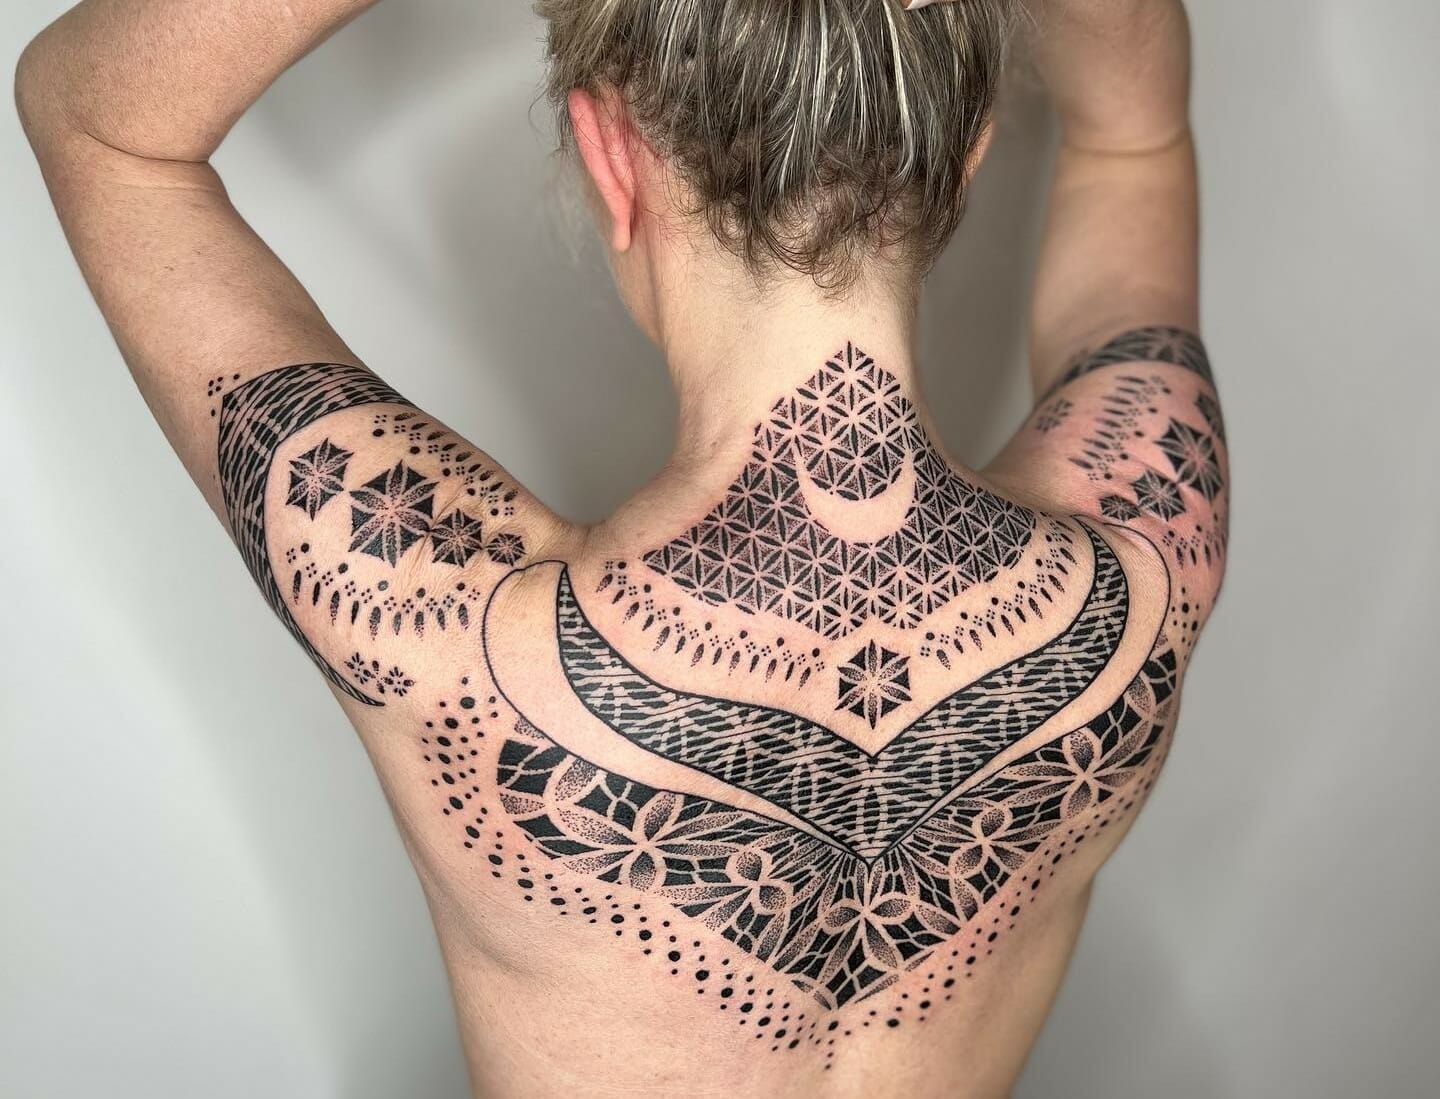 101 Best Shoulder Tattoo For Women Ideas That Will Blow Your Mind! - Outsons